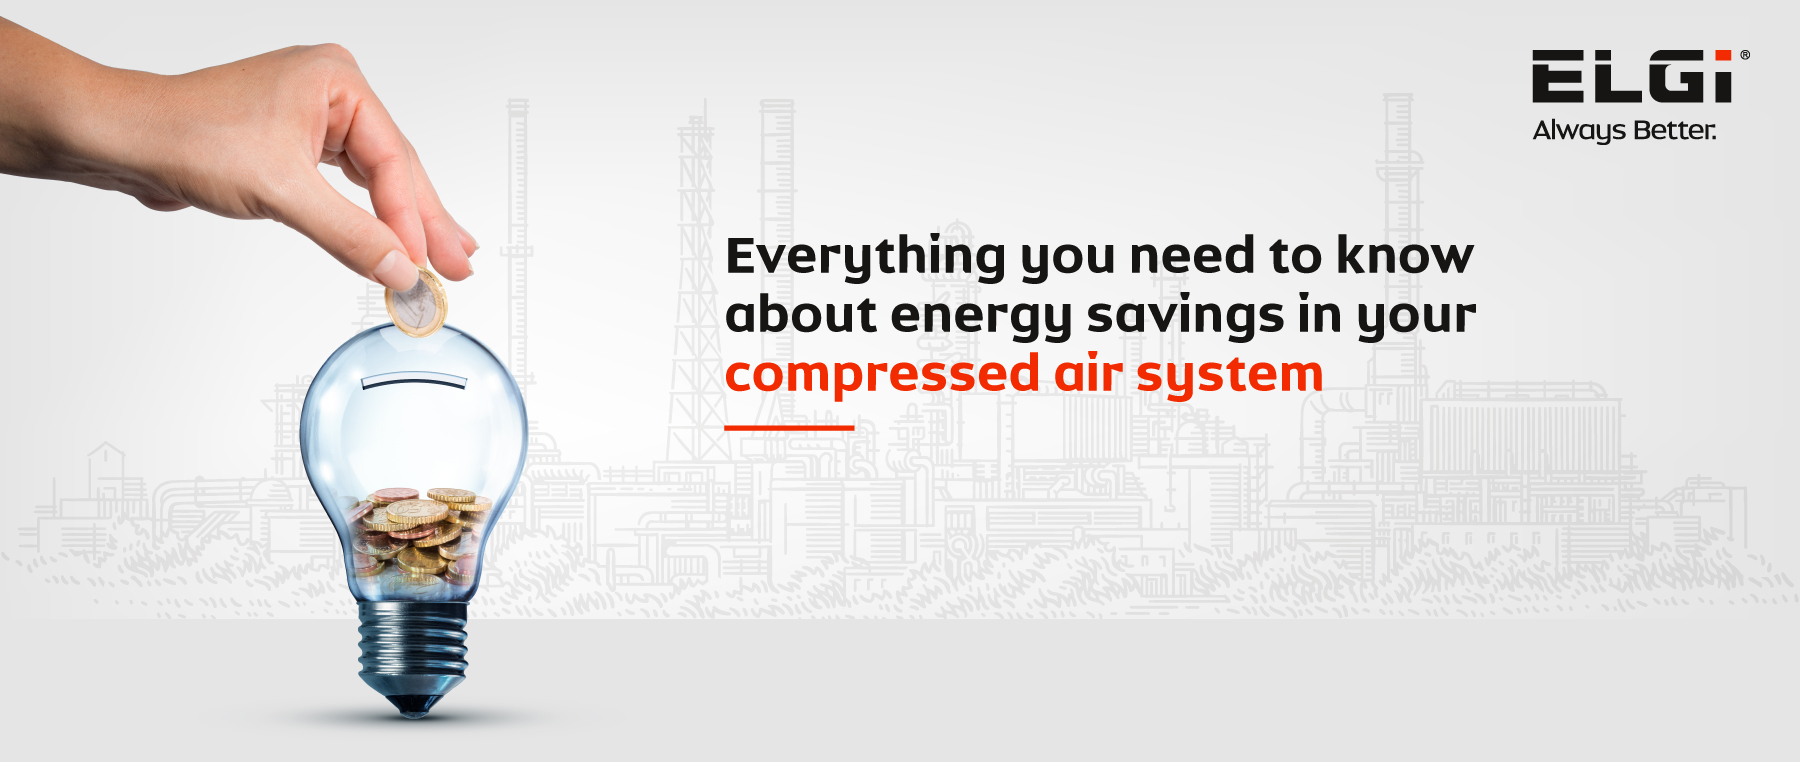 Factors to consider achieving energy efficiency in compressed air system